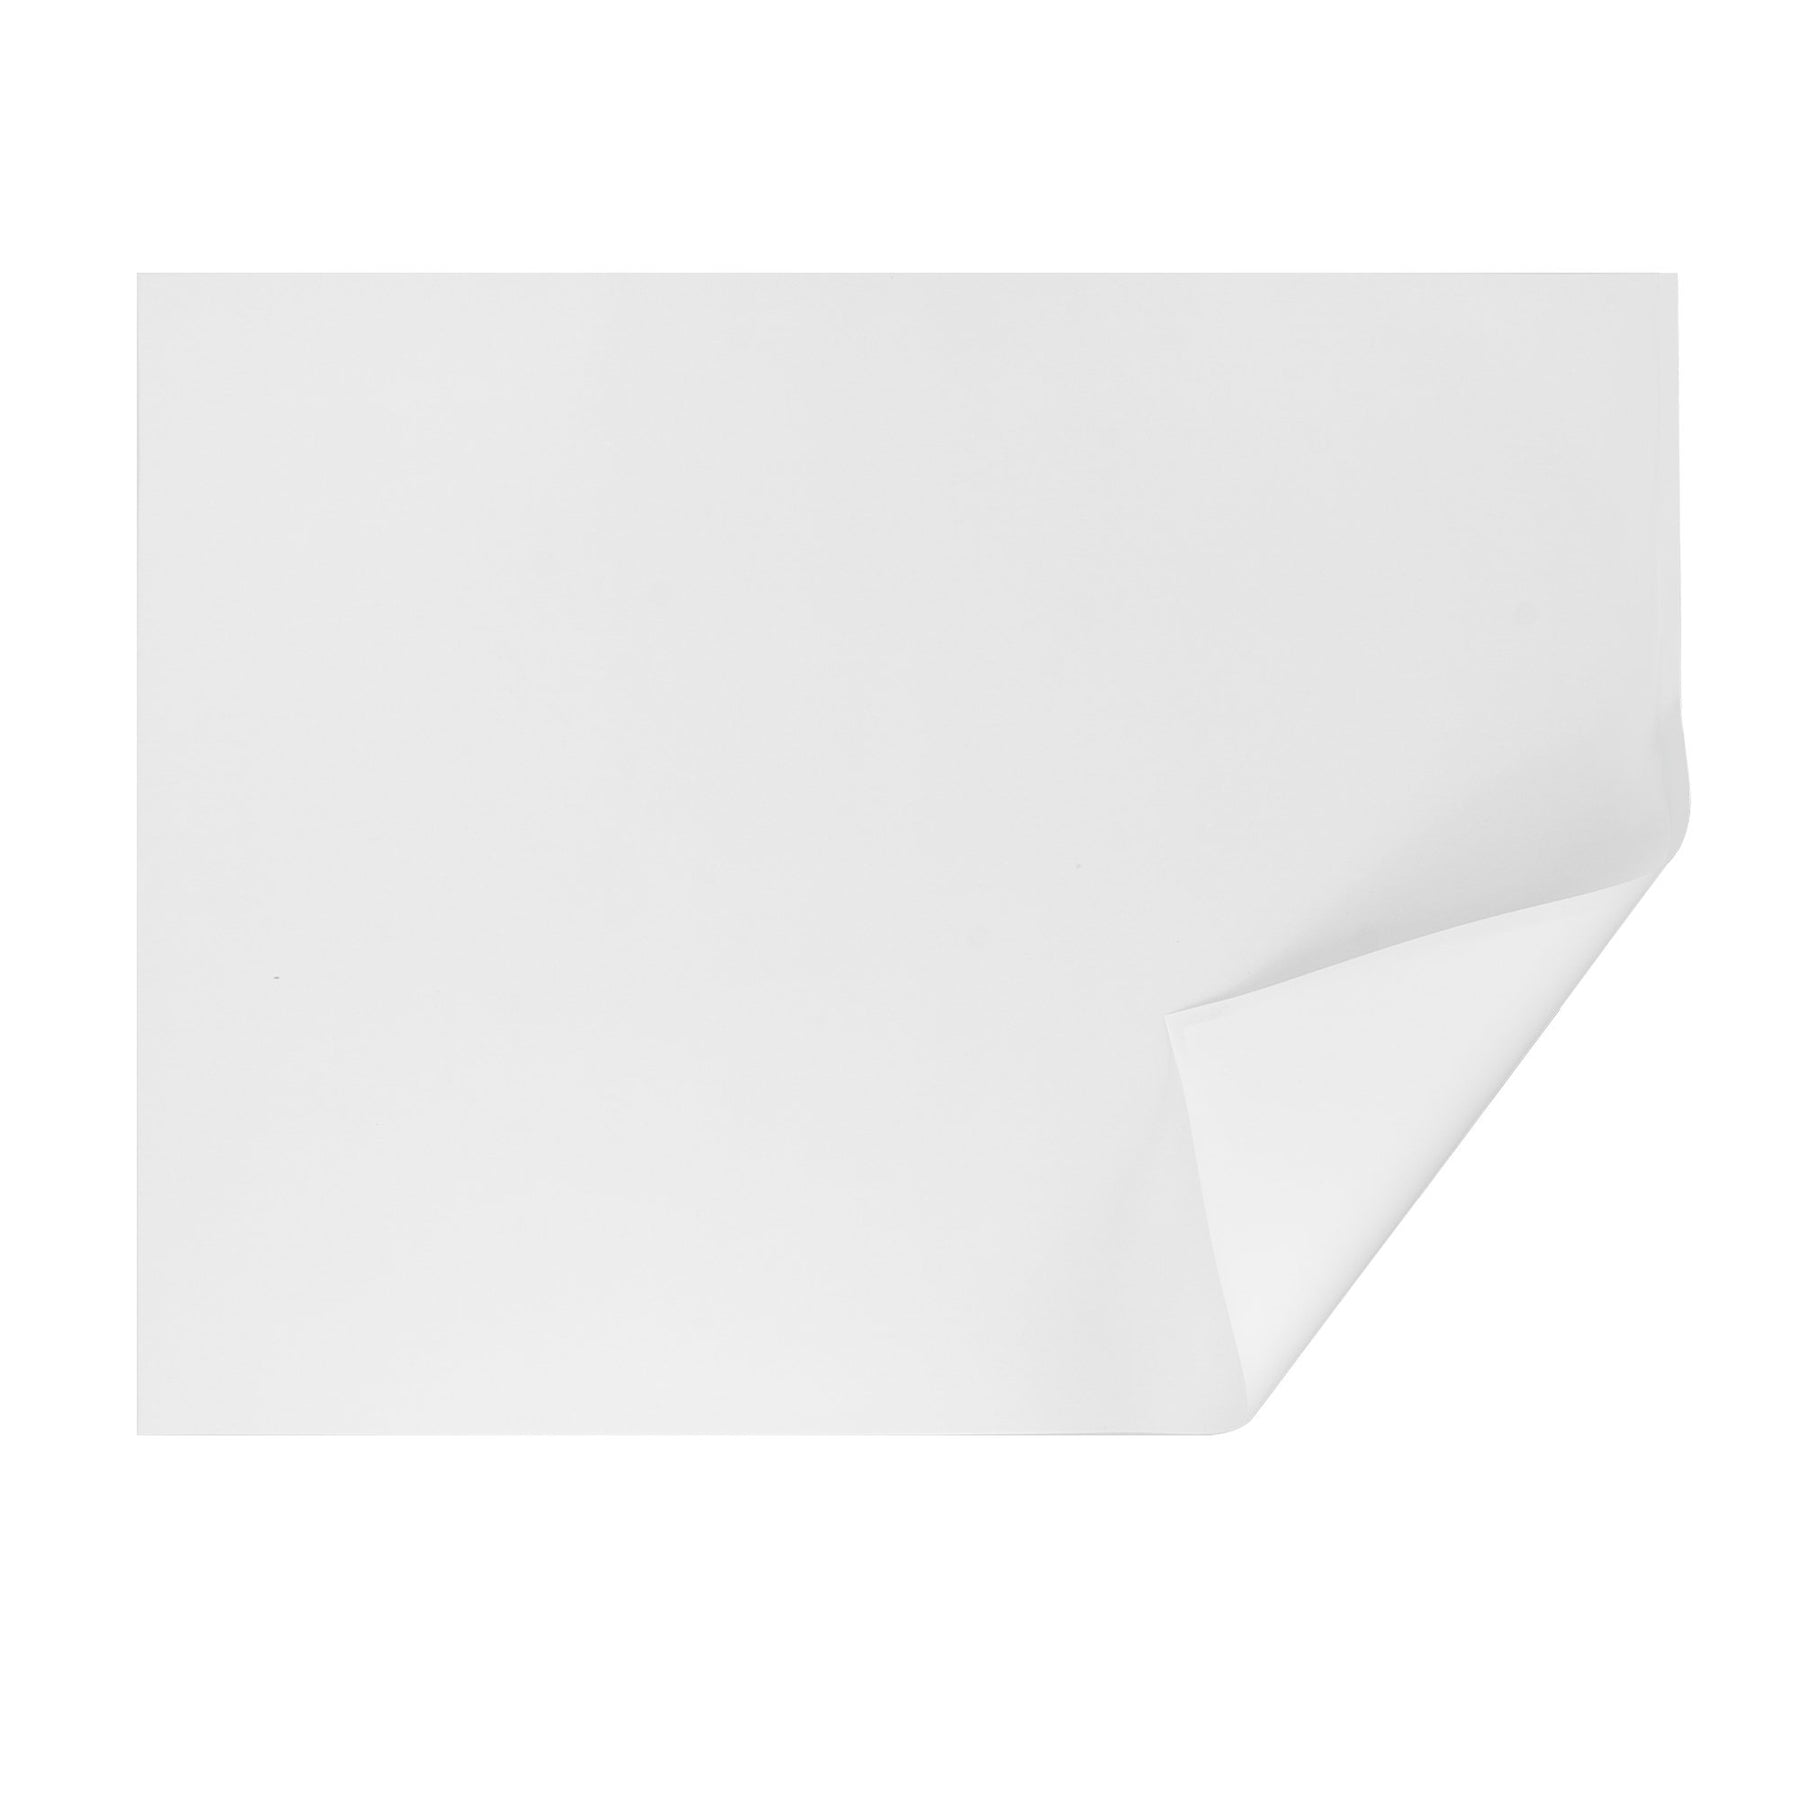 Pacific Arc, Drafting Vellum Sheets, 10-Sheets 8.5 x 11 inches Paper Rag Vellum